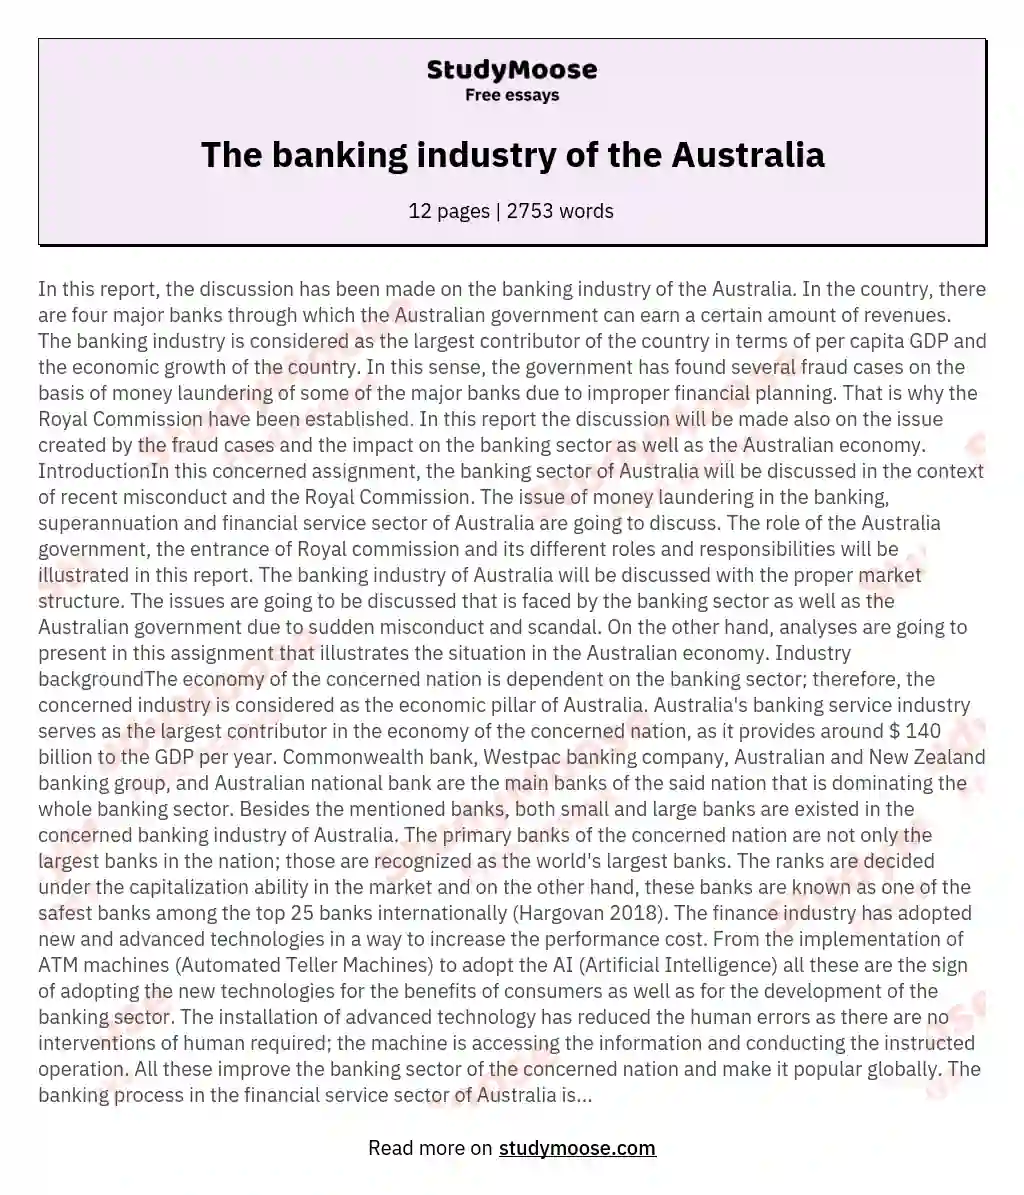 The banking industry of the Australia essay